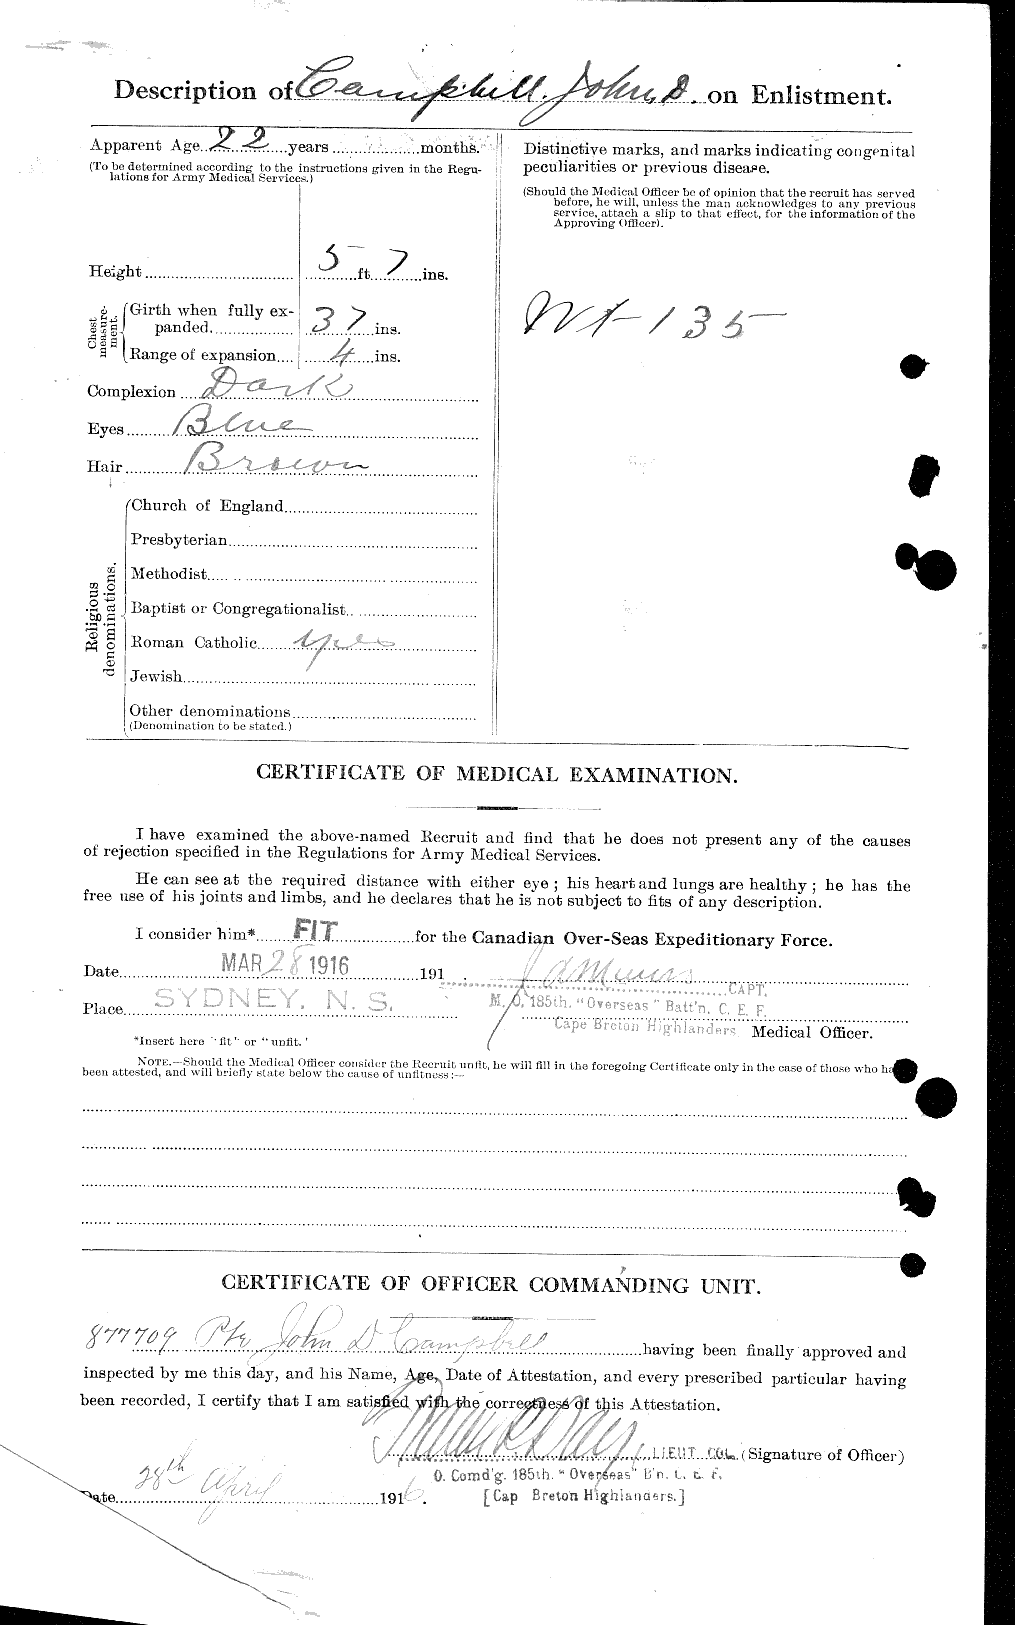 Personnel Records of the First World War - CEF 006886b